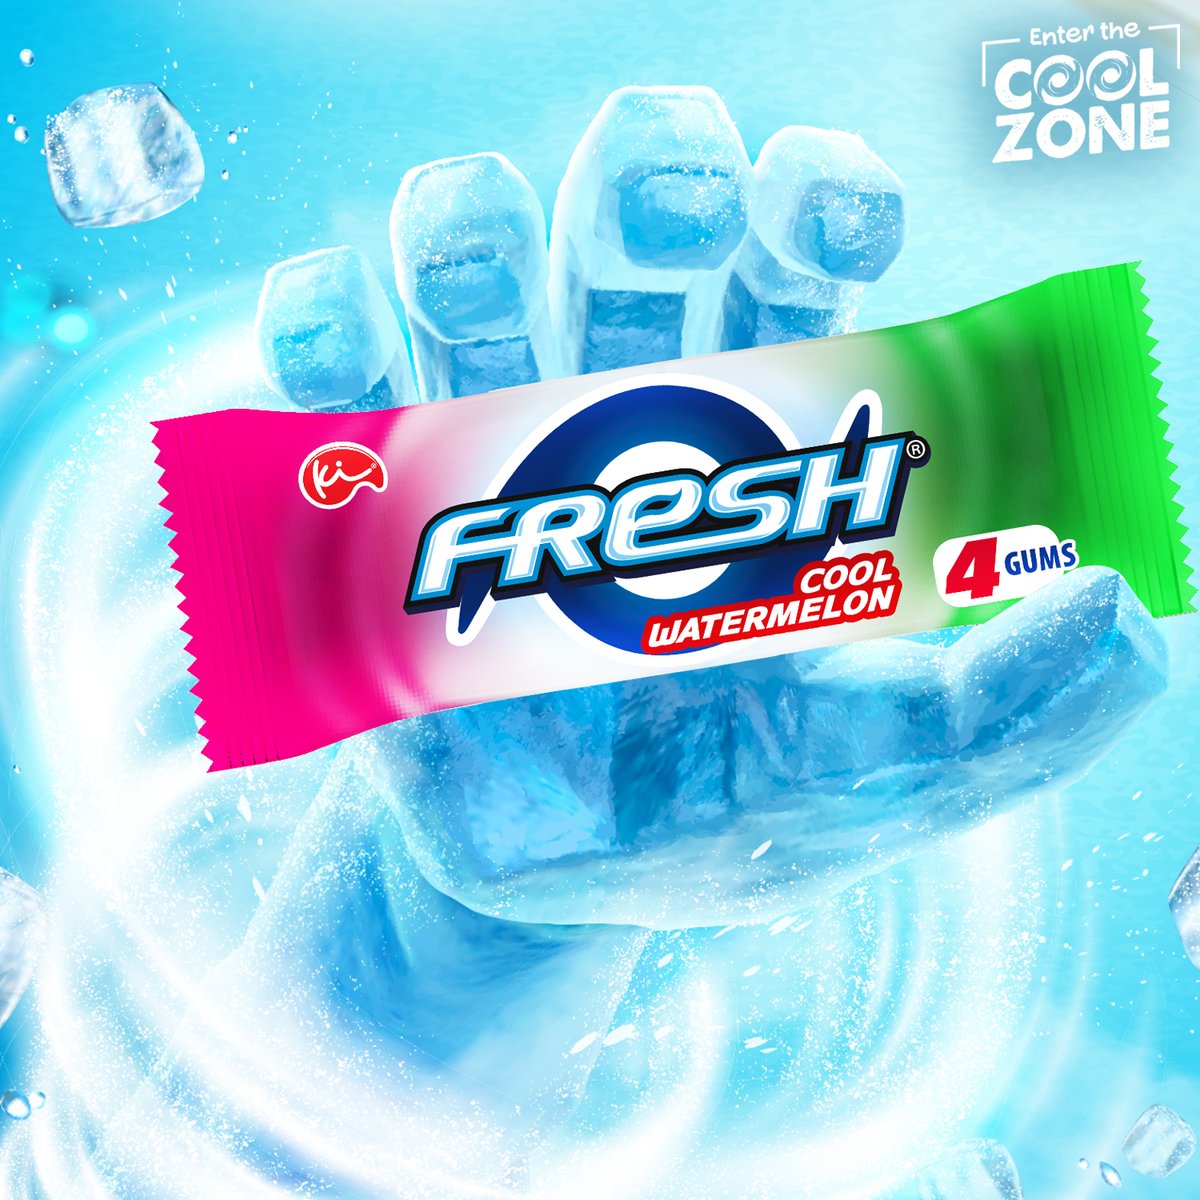 Who needs a watermelon slice when you can get the same juicy flavor from Fresh Watermelon? Try it now and thank us later! #EnterTheCoolZone #FreshChewingGum